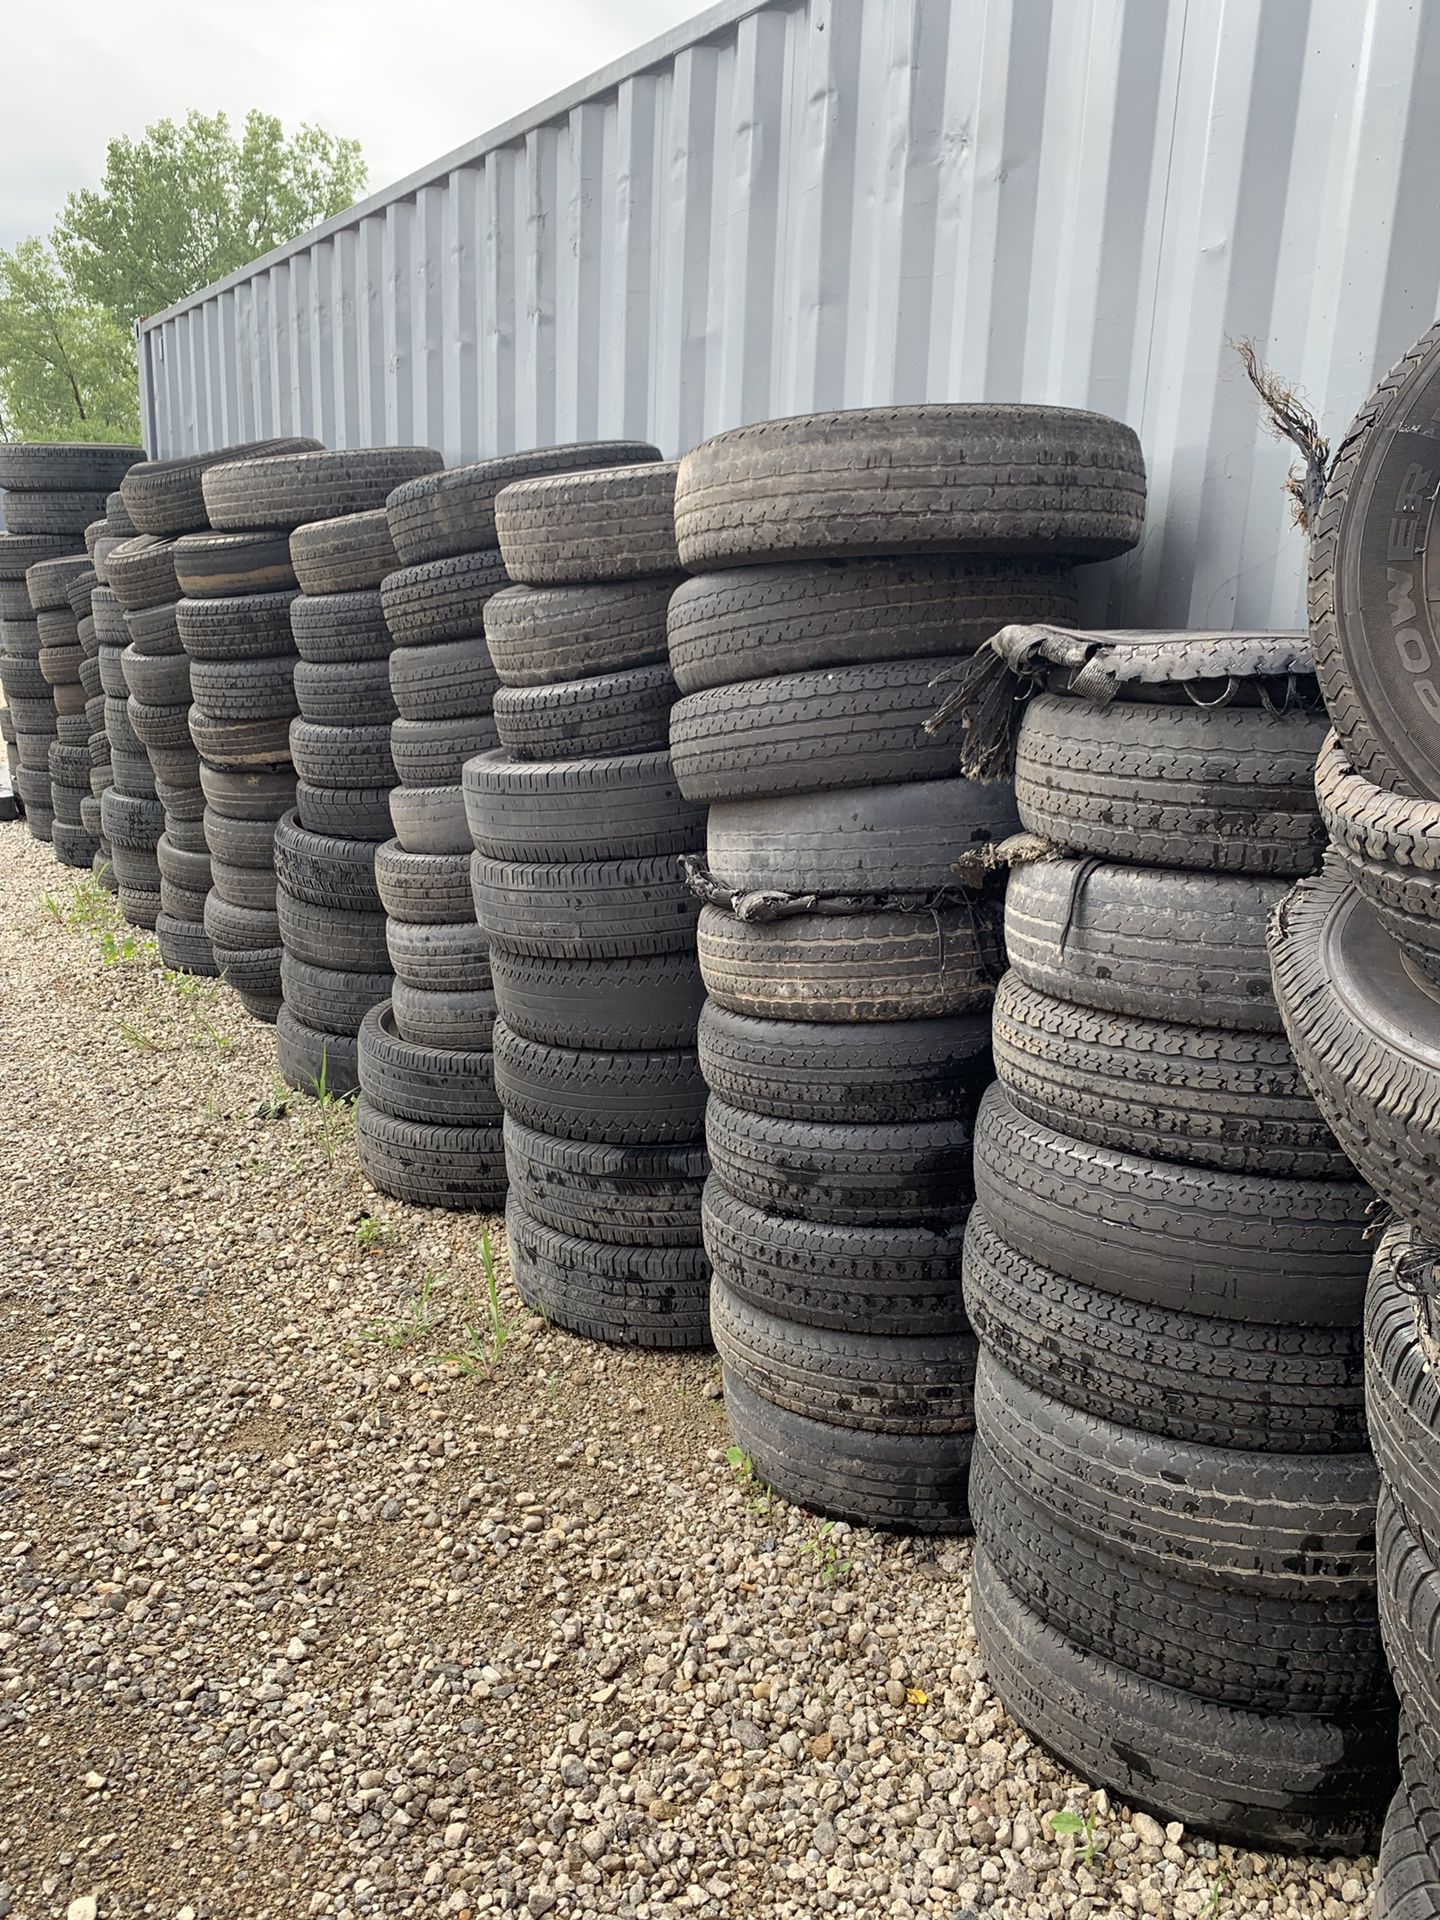 Trailer and Truck tires